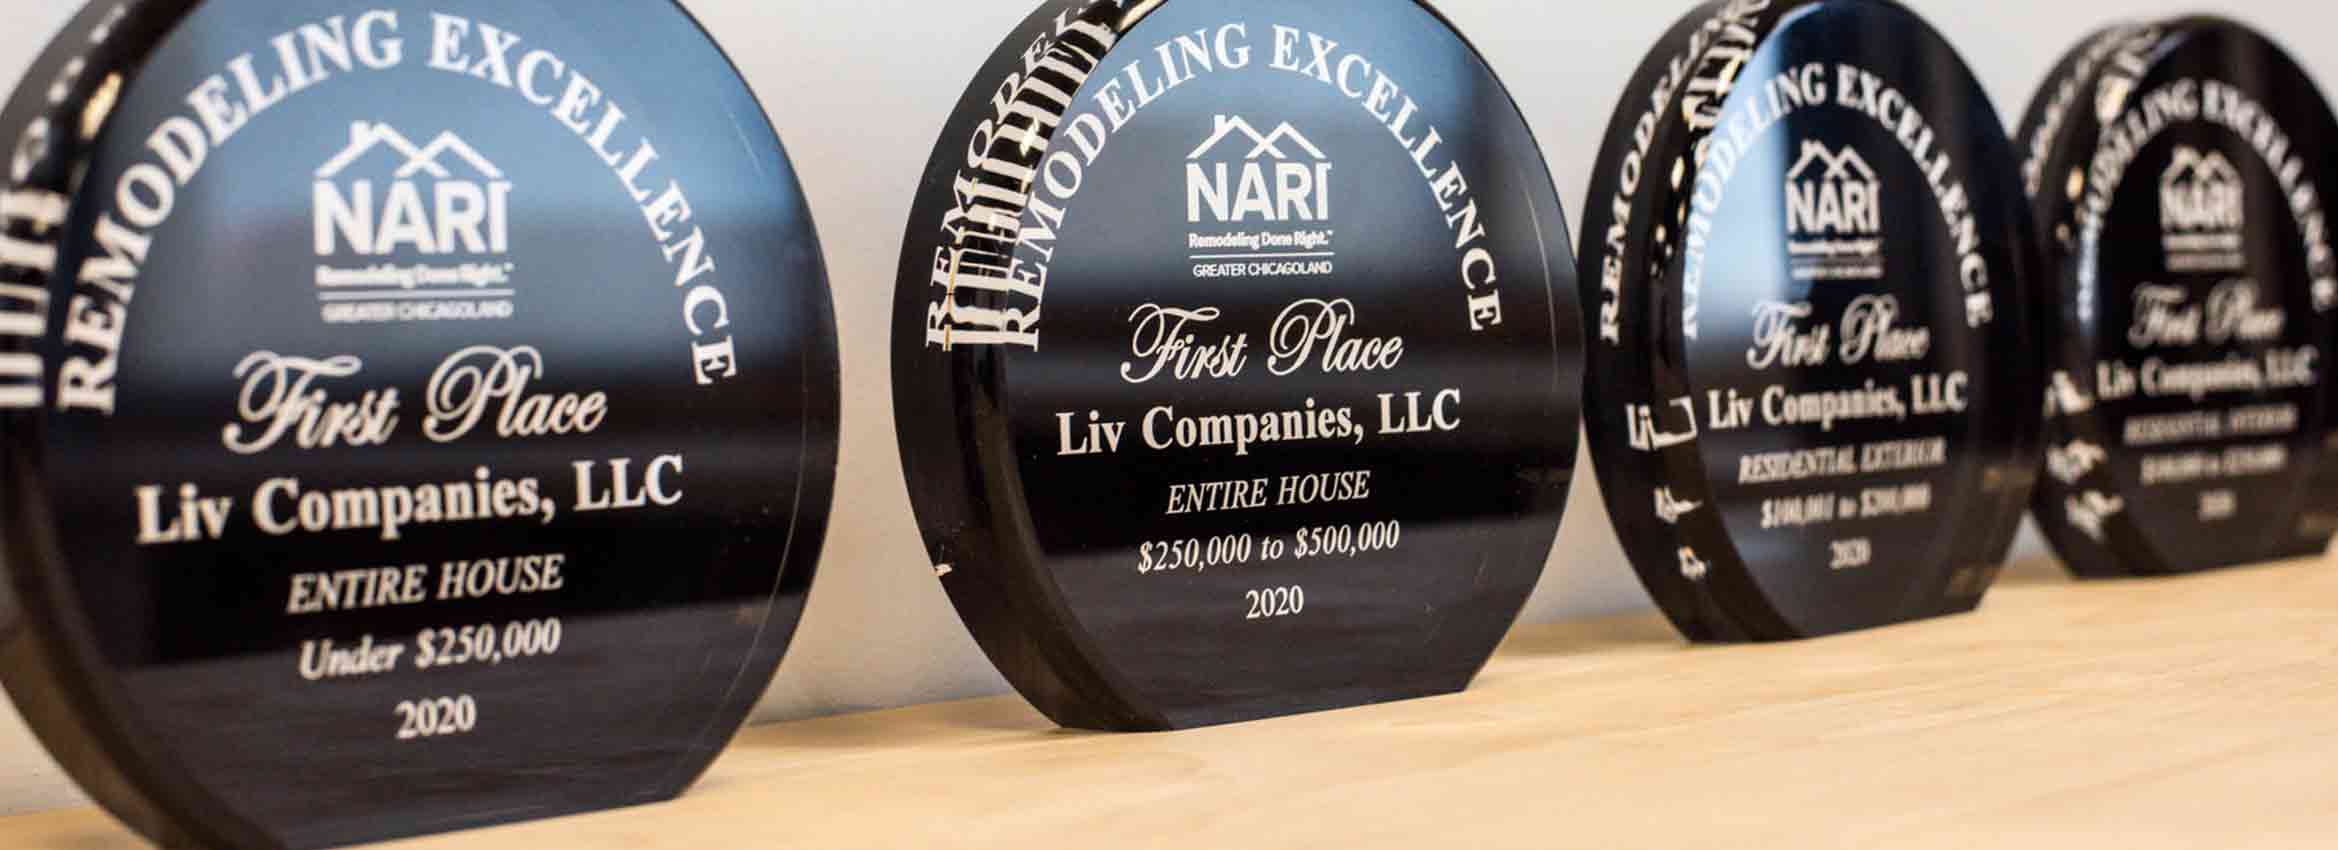 remodeling excellence awards on a shelf won by LivCo